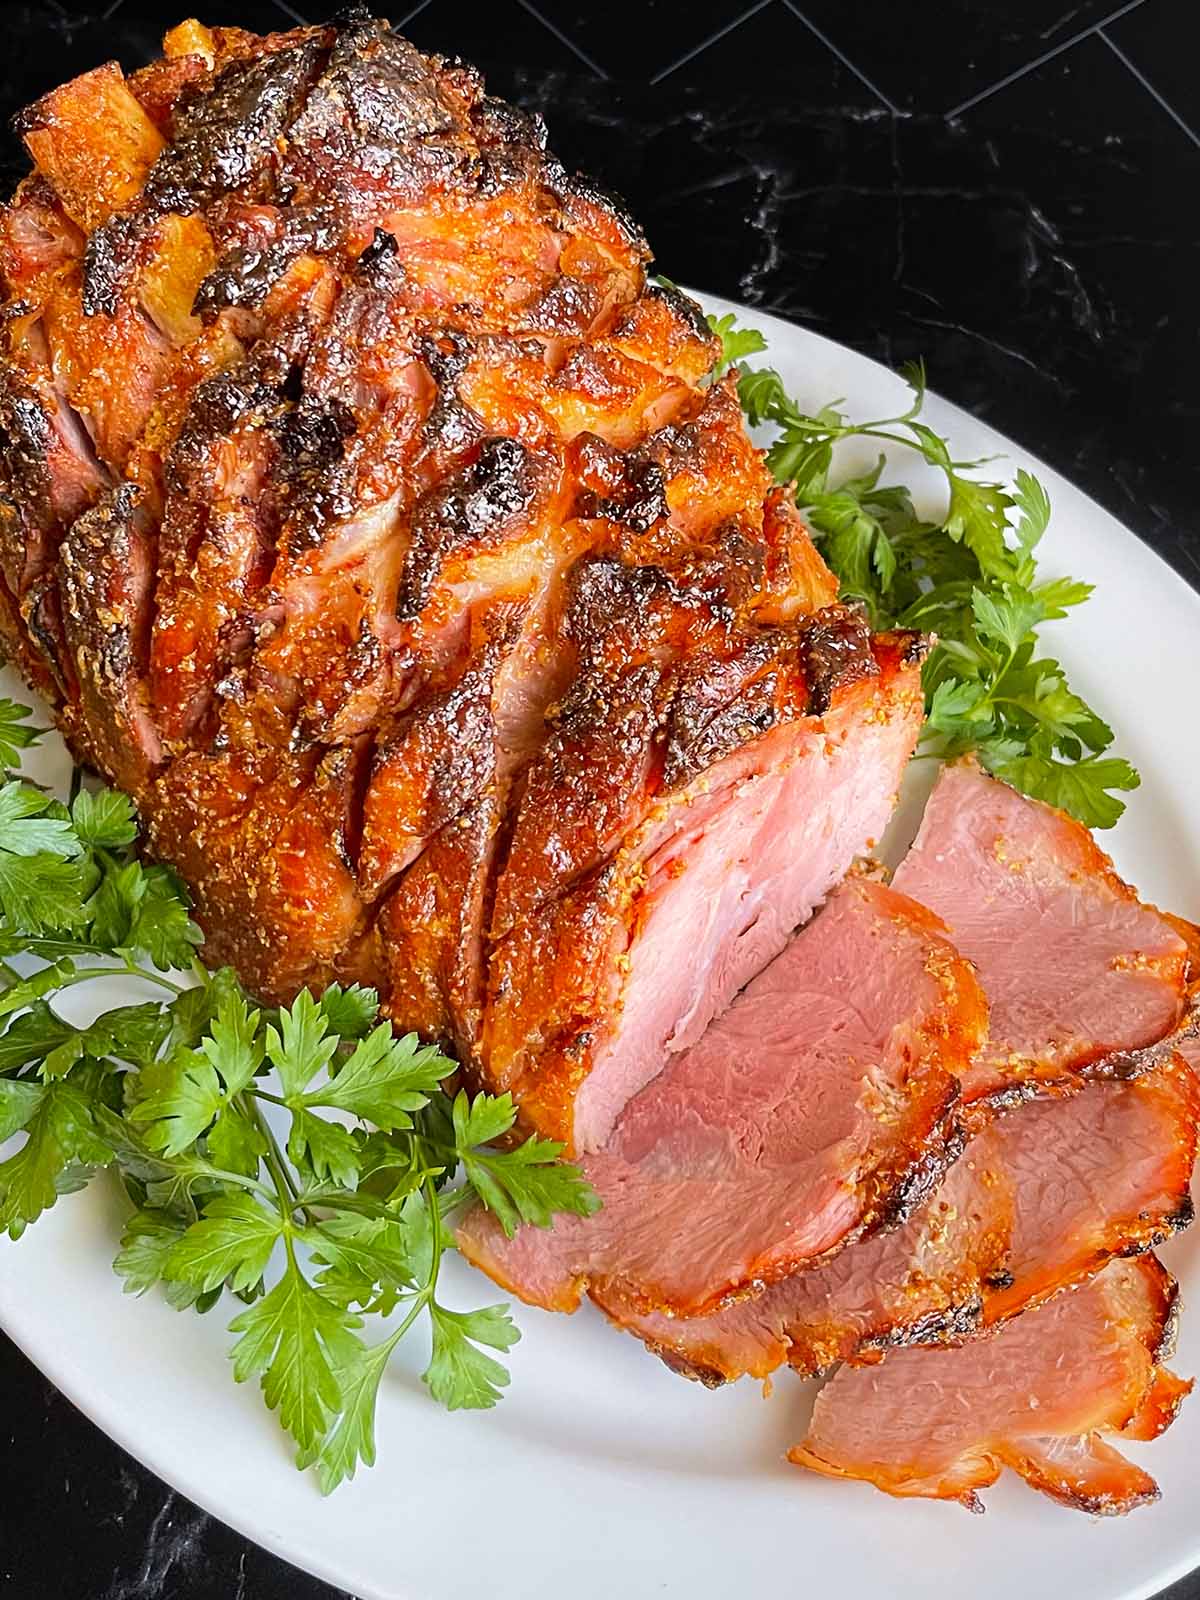 Brown Sugar Glazed Ham - Cooking For My Soul